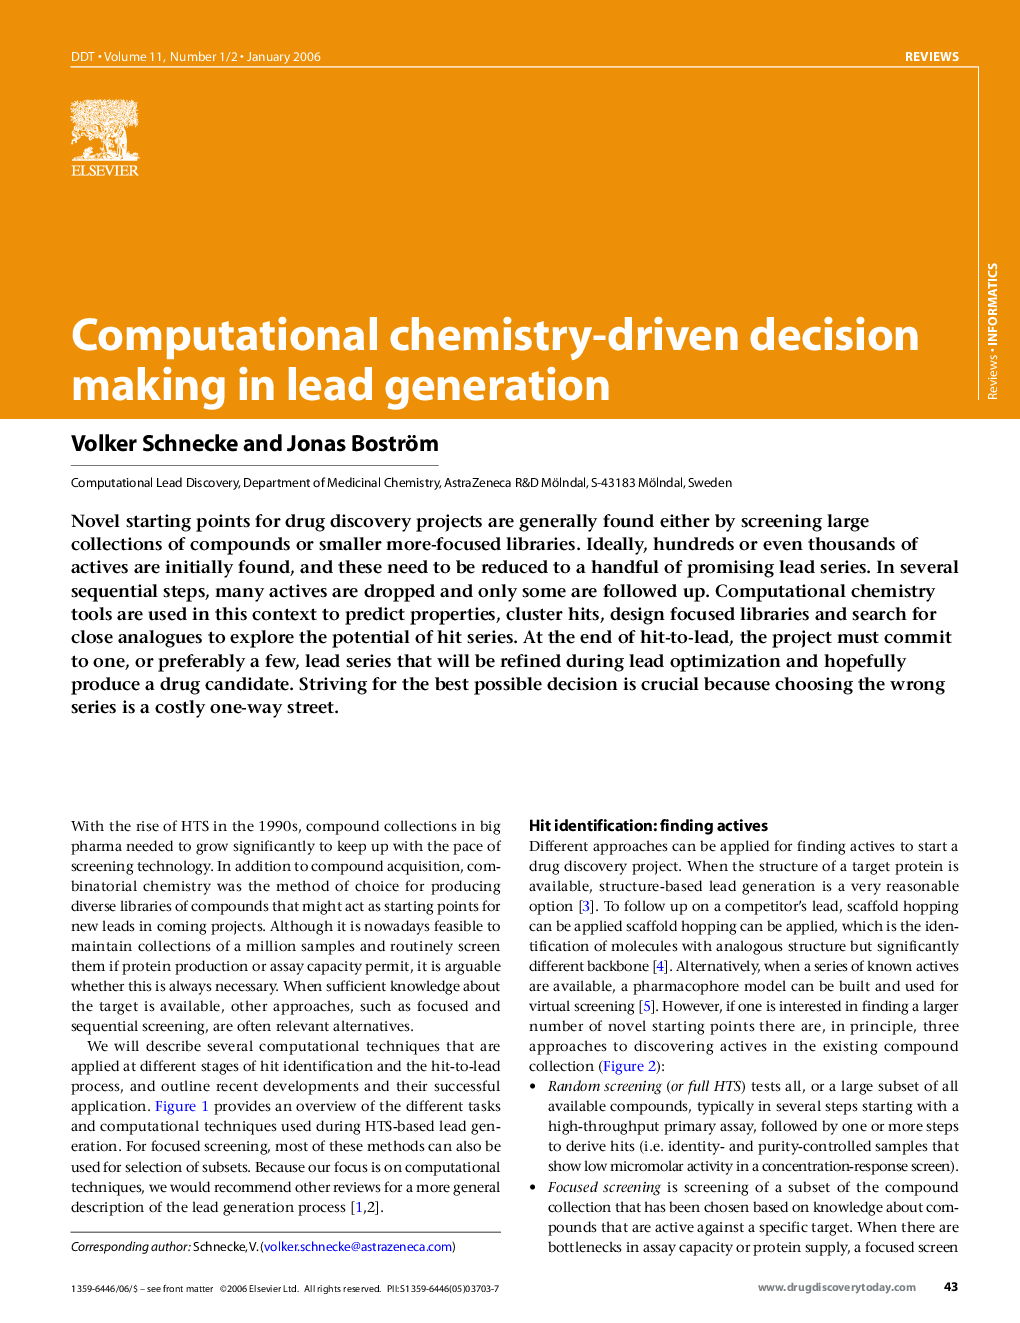 Computational chemistry-driven decision making in lead generation